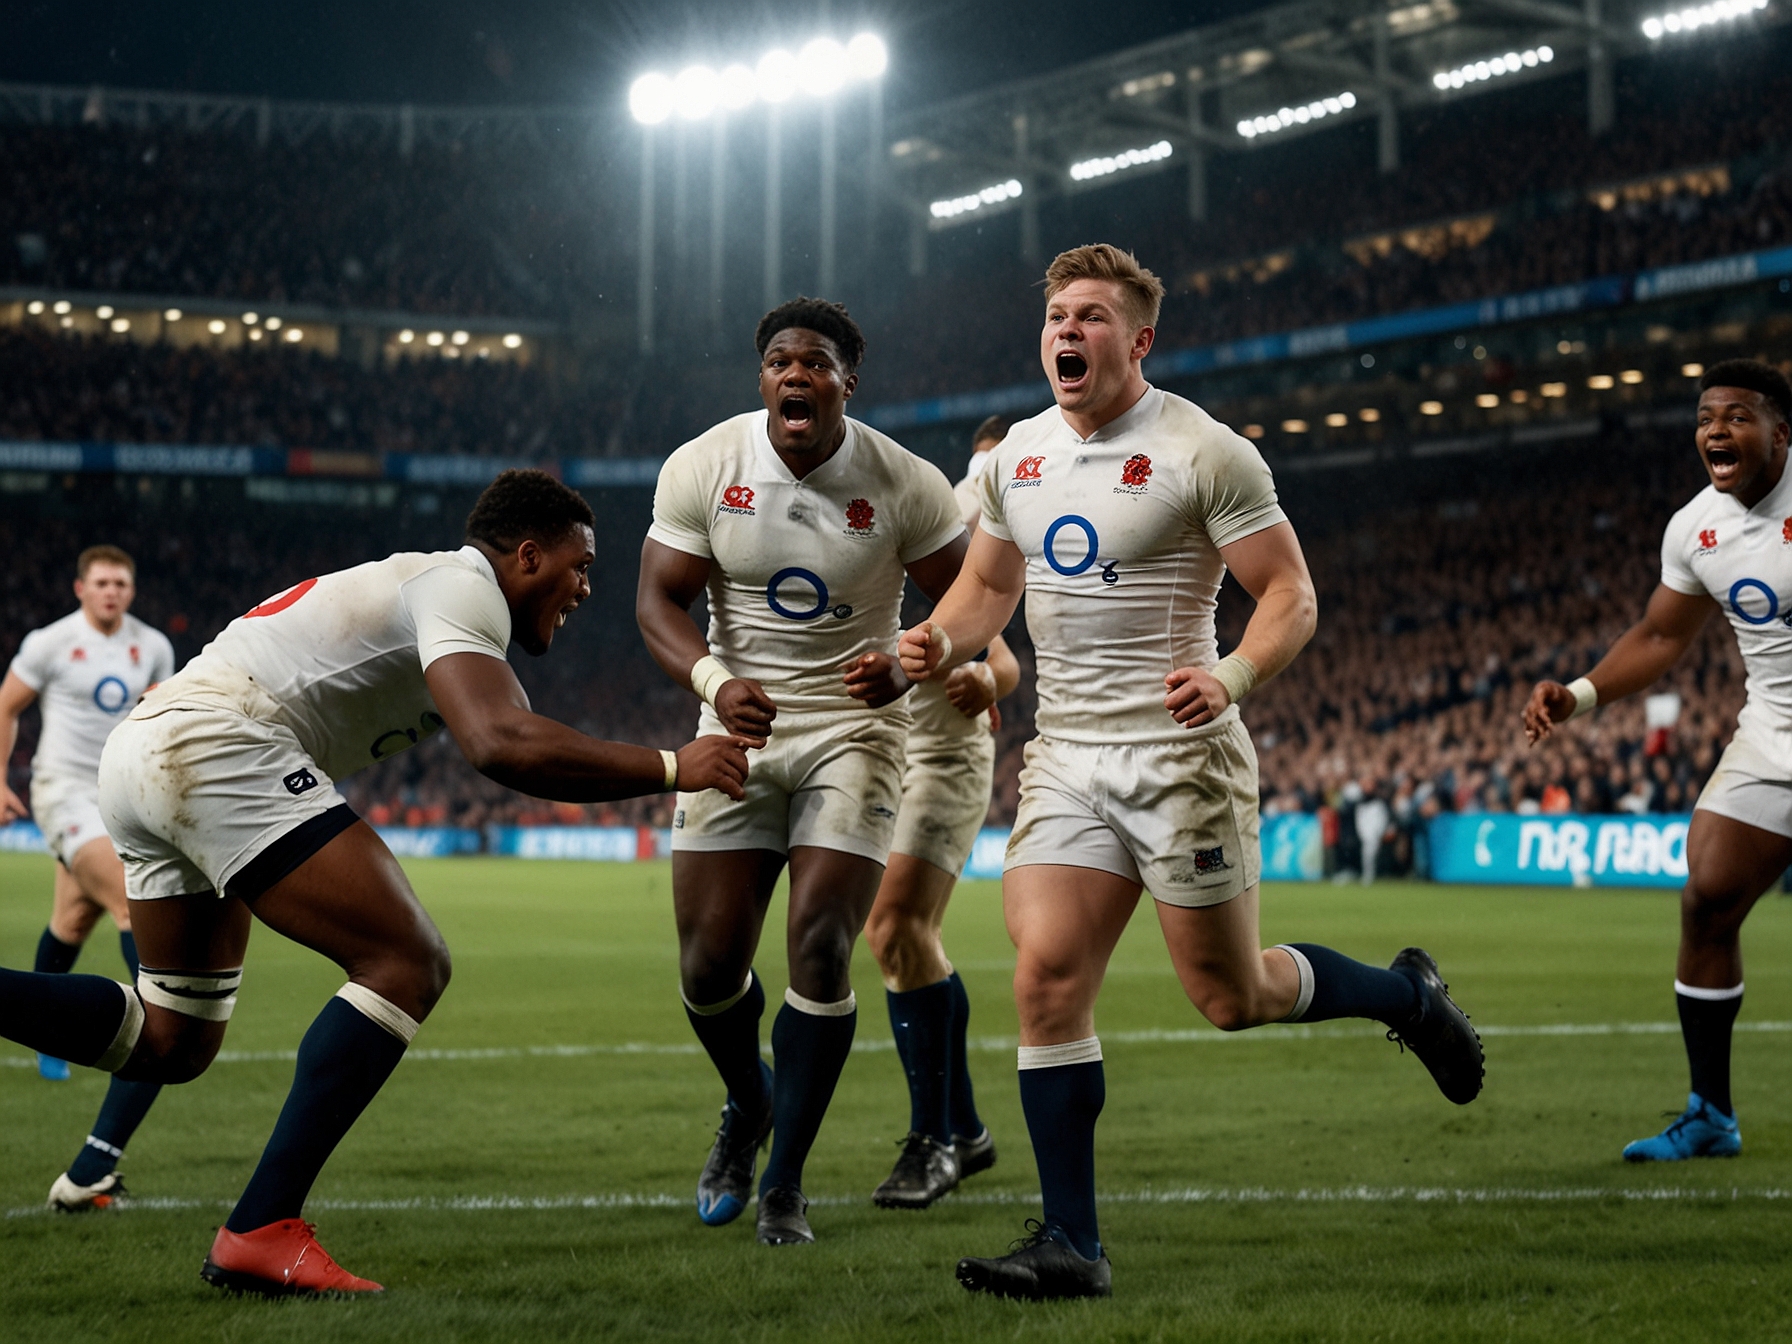 England's rugby team celebrates after scoring a try against Japan, with key players Maro Itoje and Owen Farrell leading the charge in a commanding display of skill and strategy.